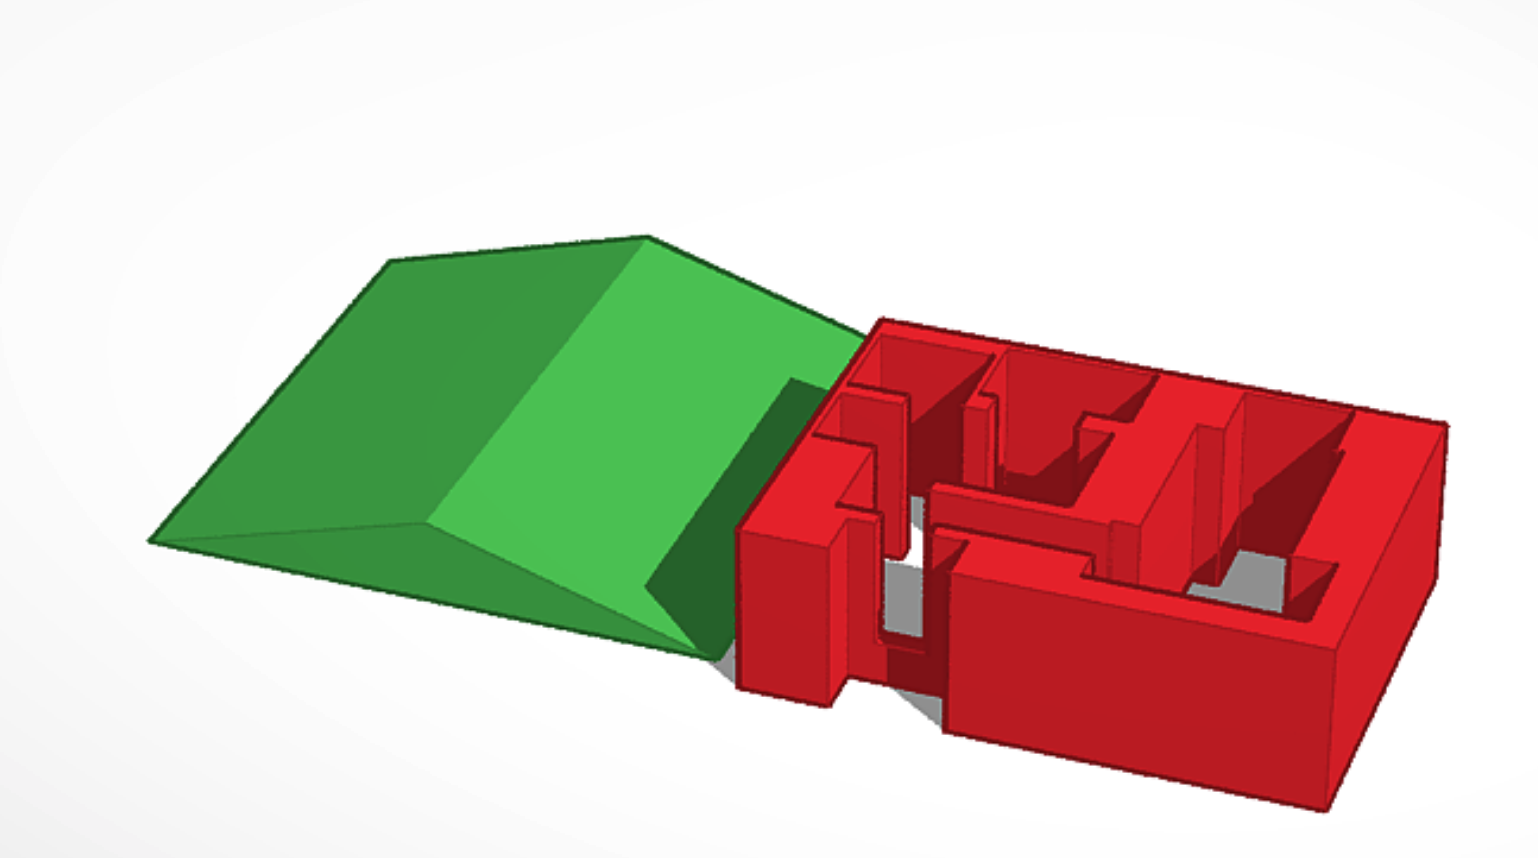 How Tinkercad can be used in math class to teach geometric transformations.